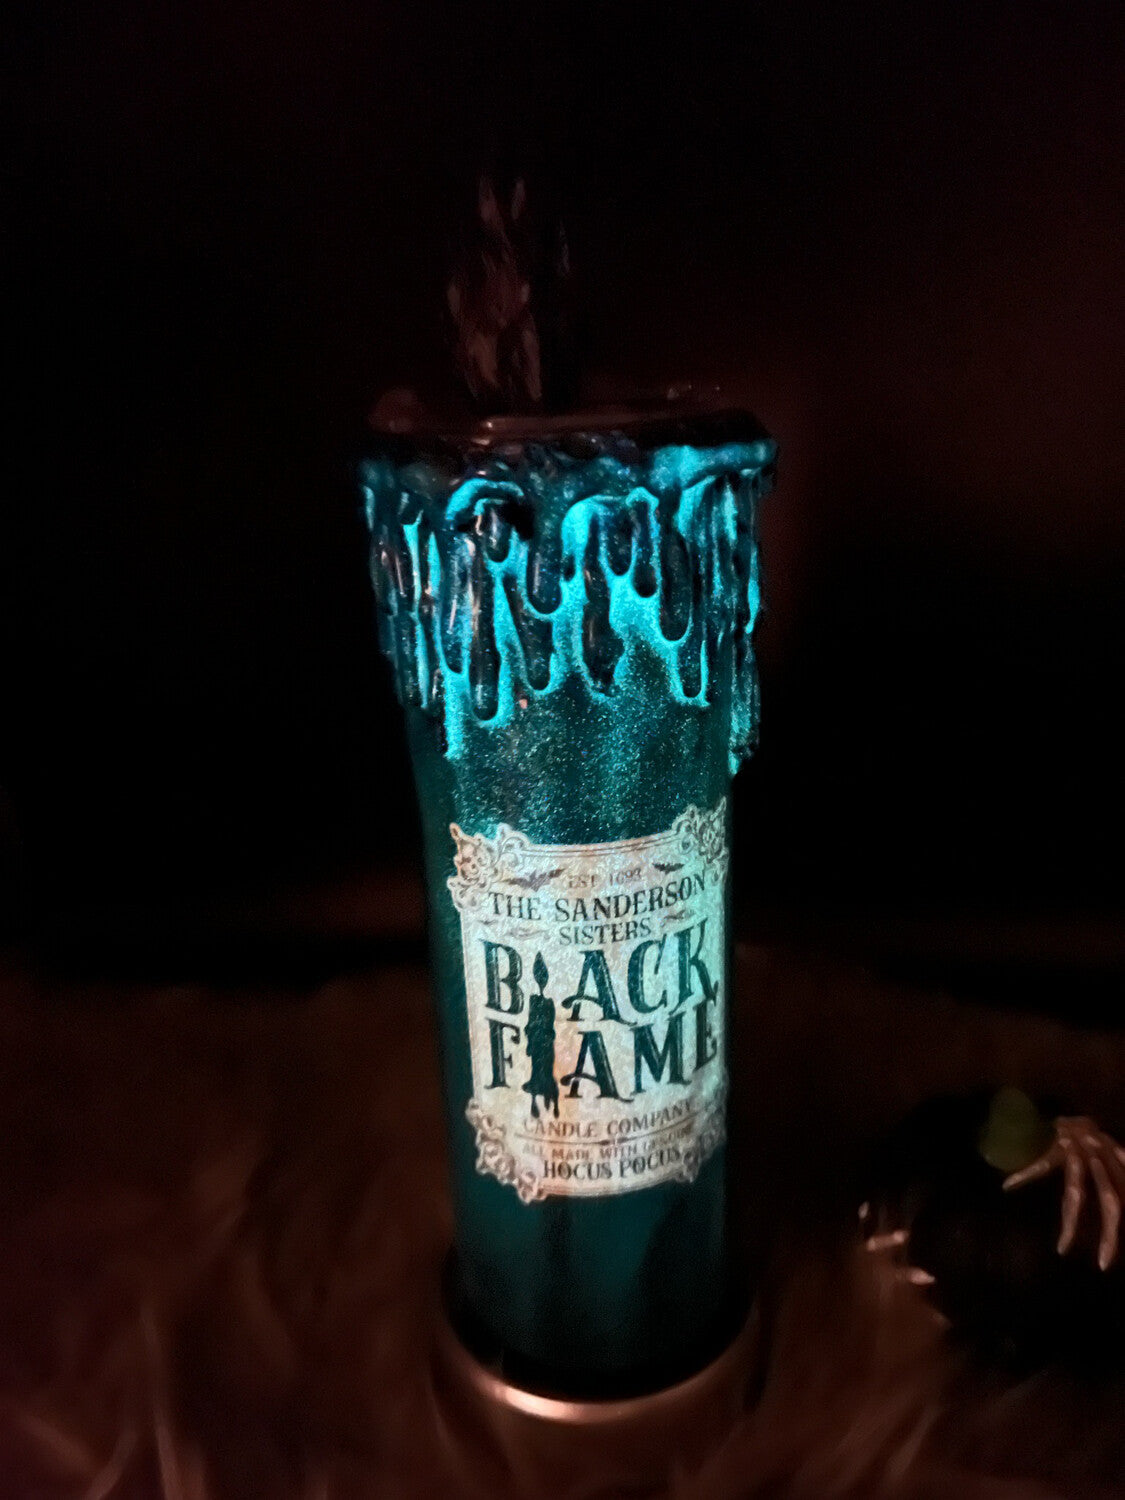 30oz Black flame stainless steel tumbler made with glow-in-the-dark mica powder